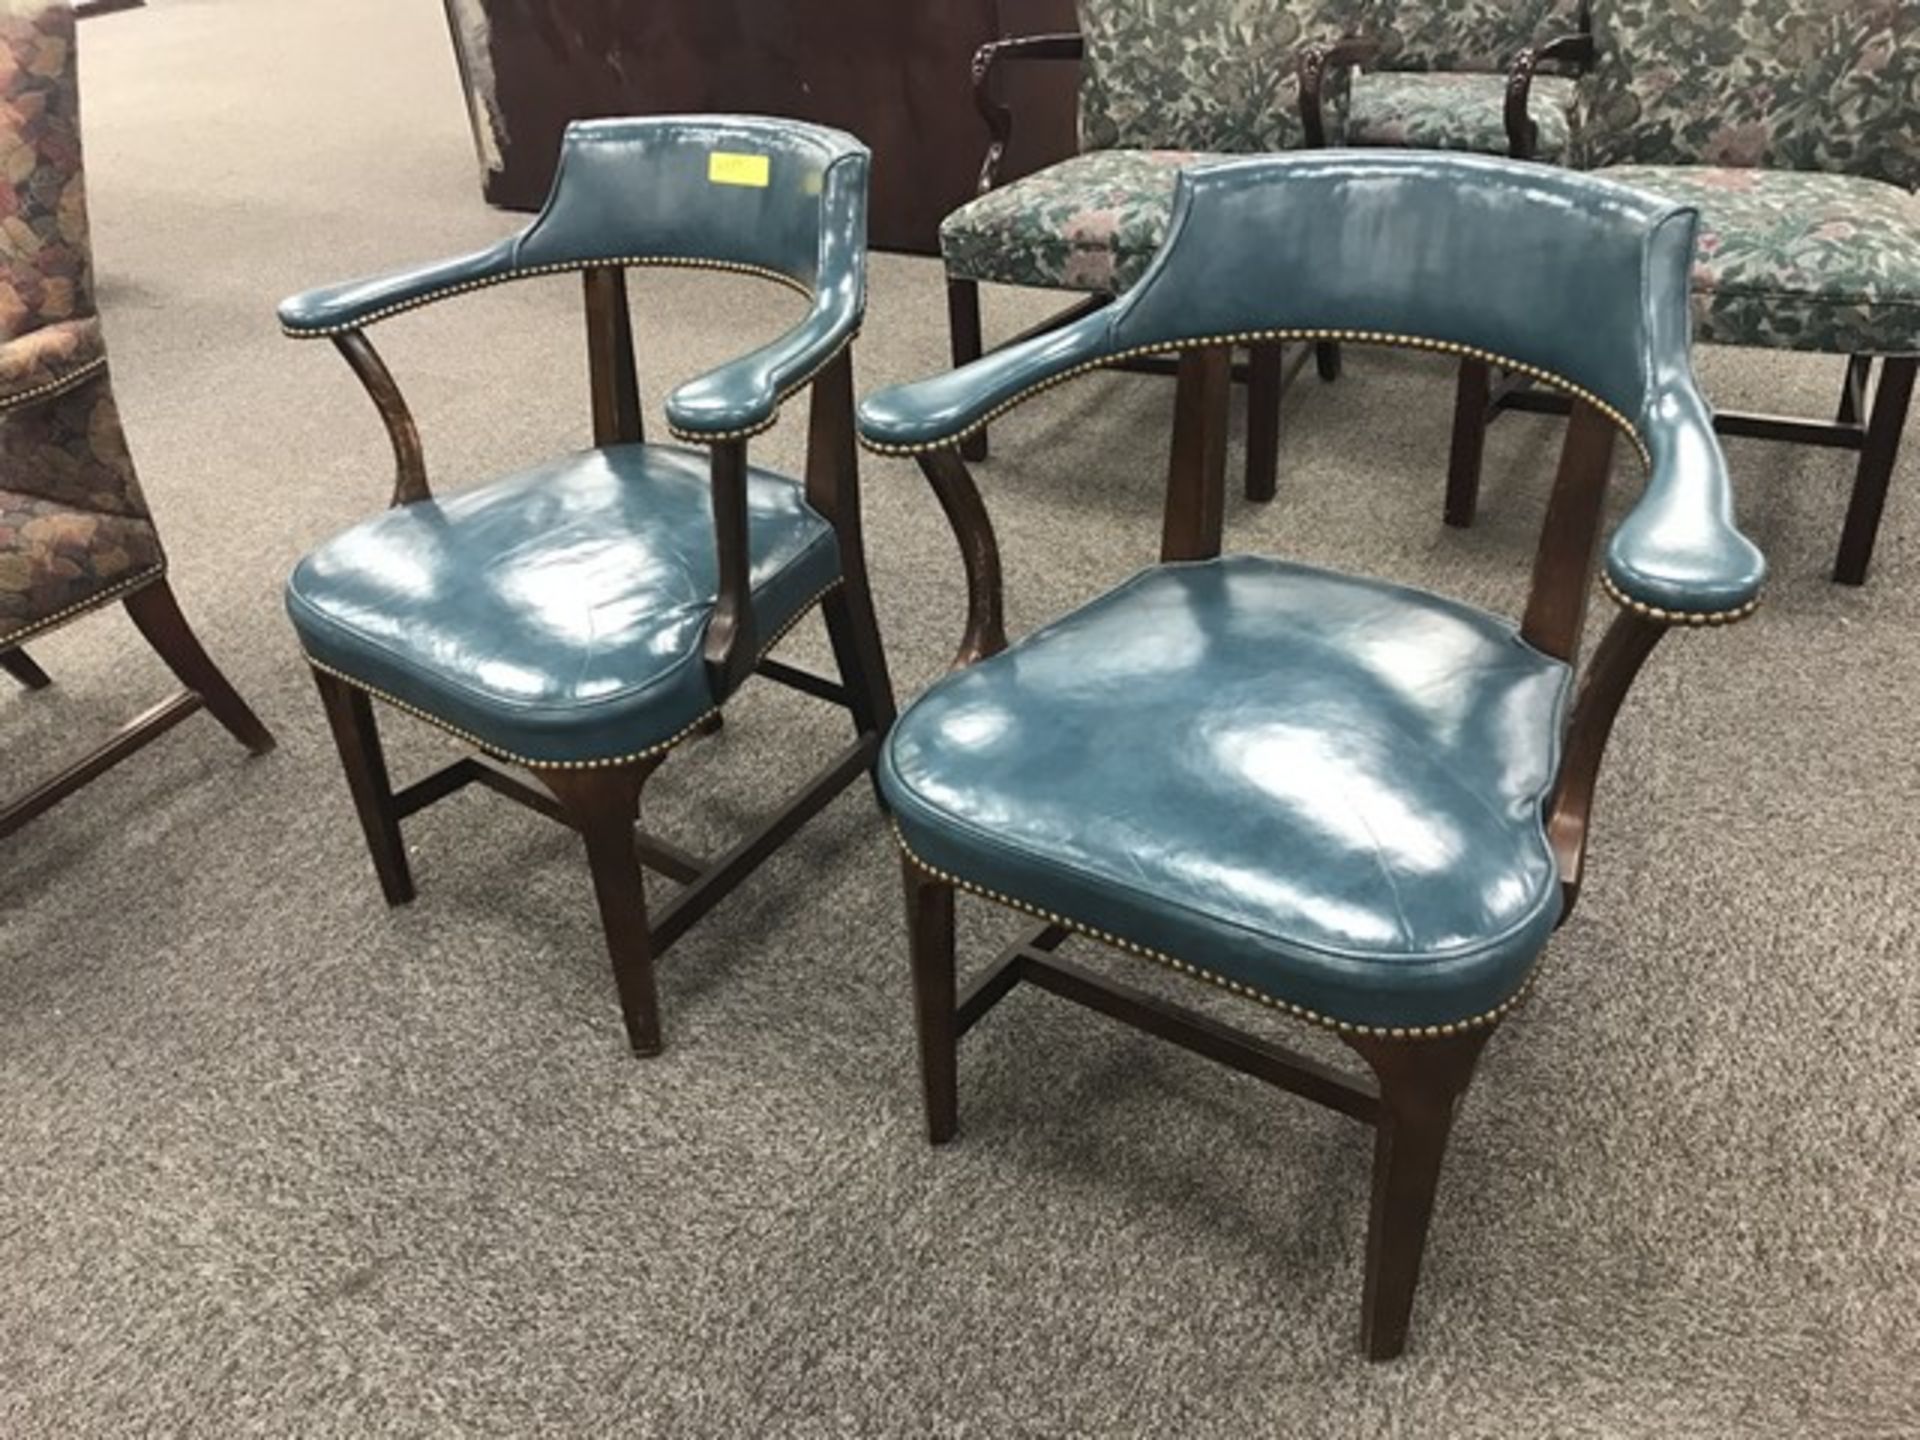 TEAL LEATHER CLUB CHAIRS